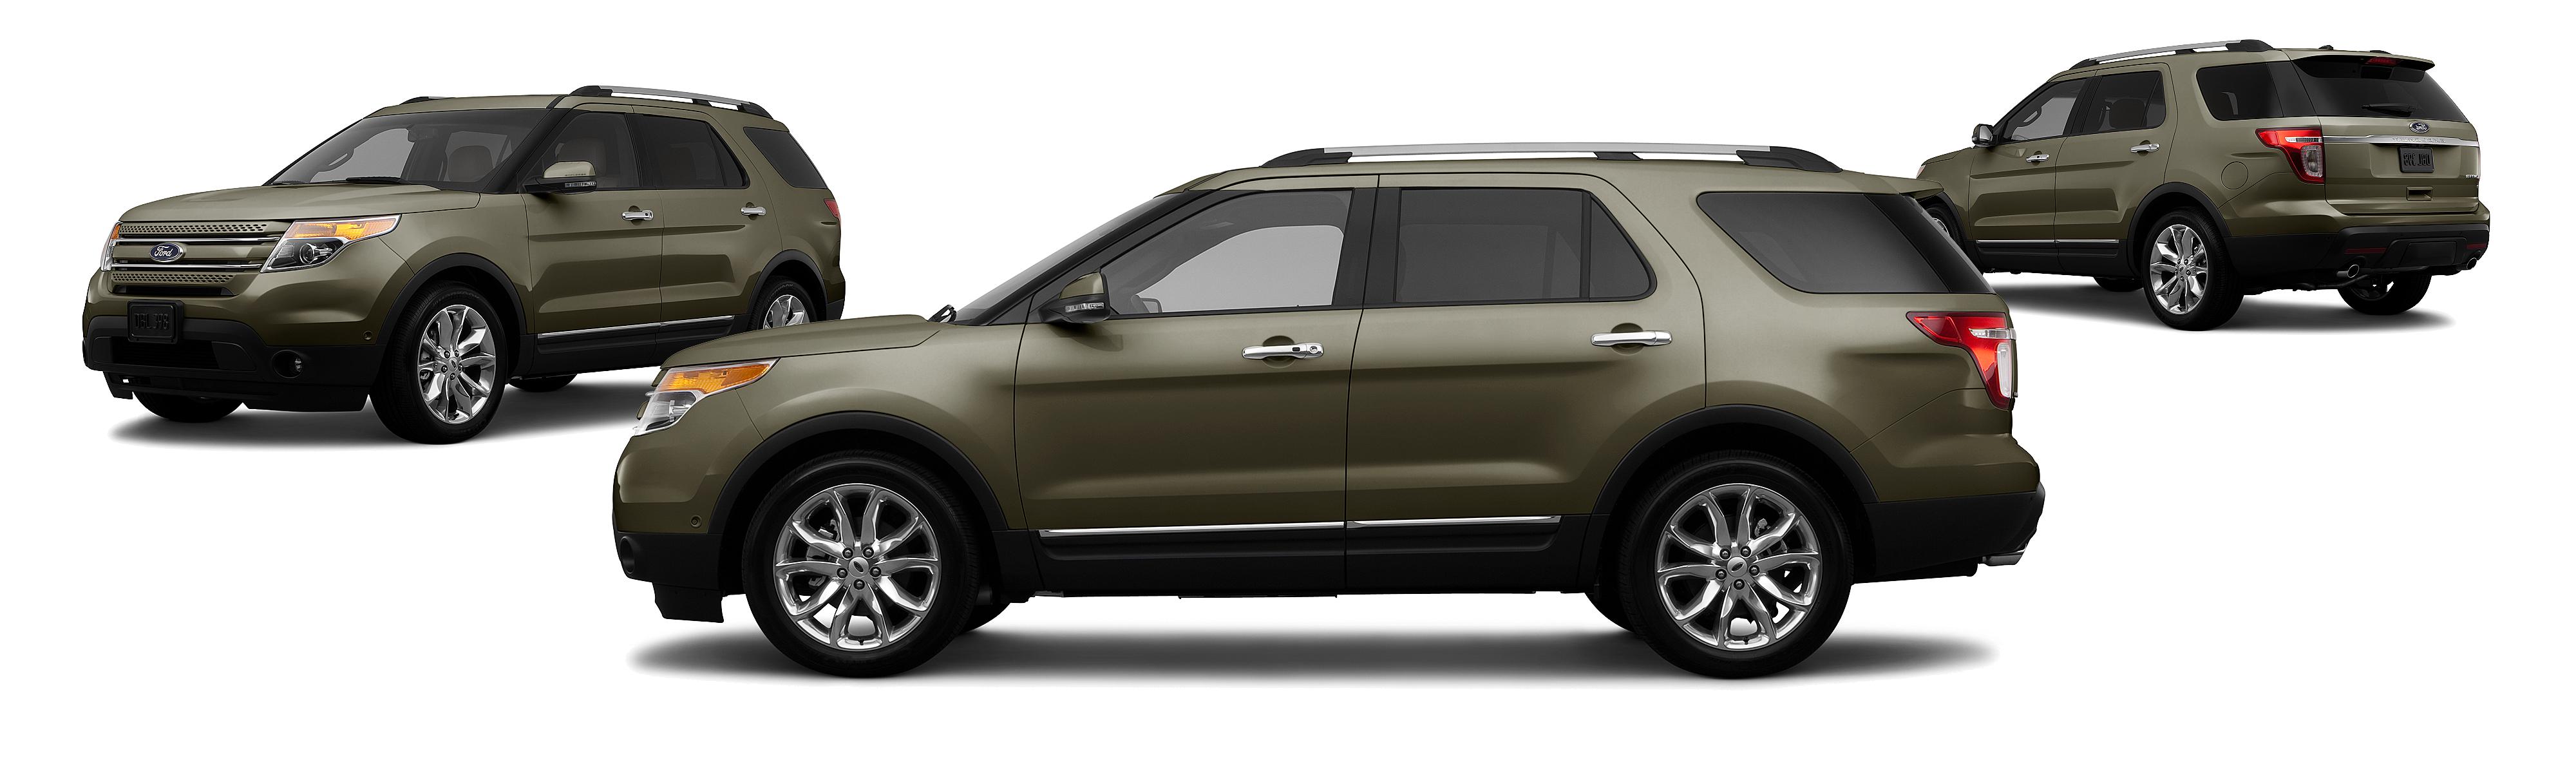 2012 Ford Explorer AWD Limited 4dr SUV - Research - GrooveCar